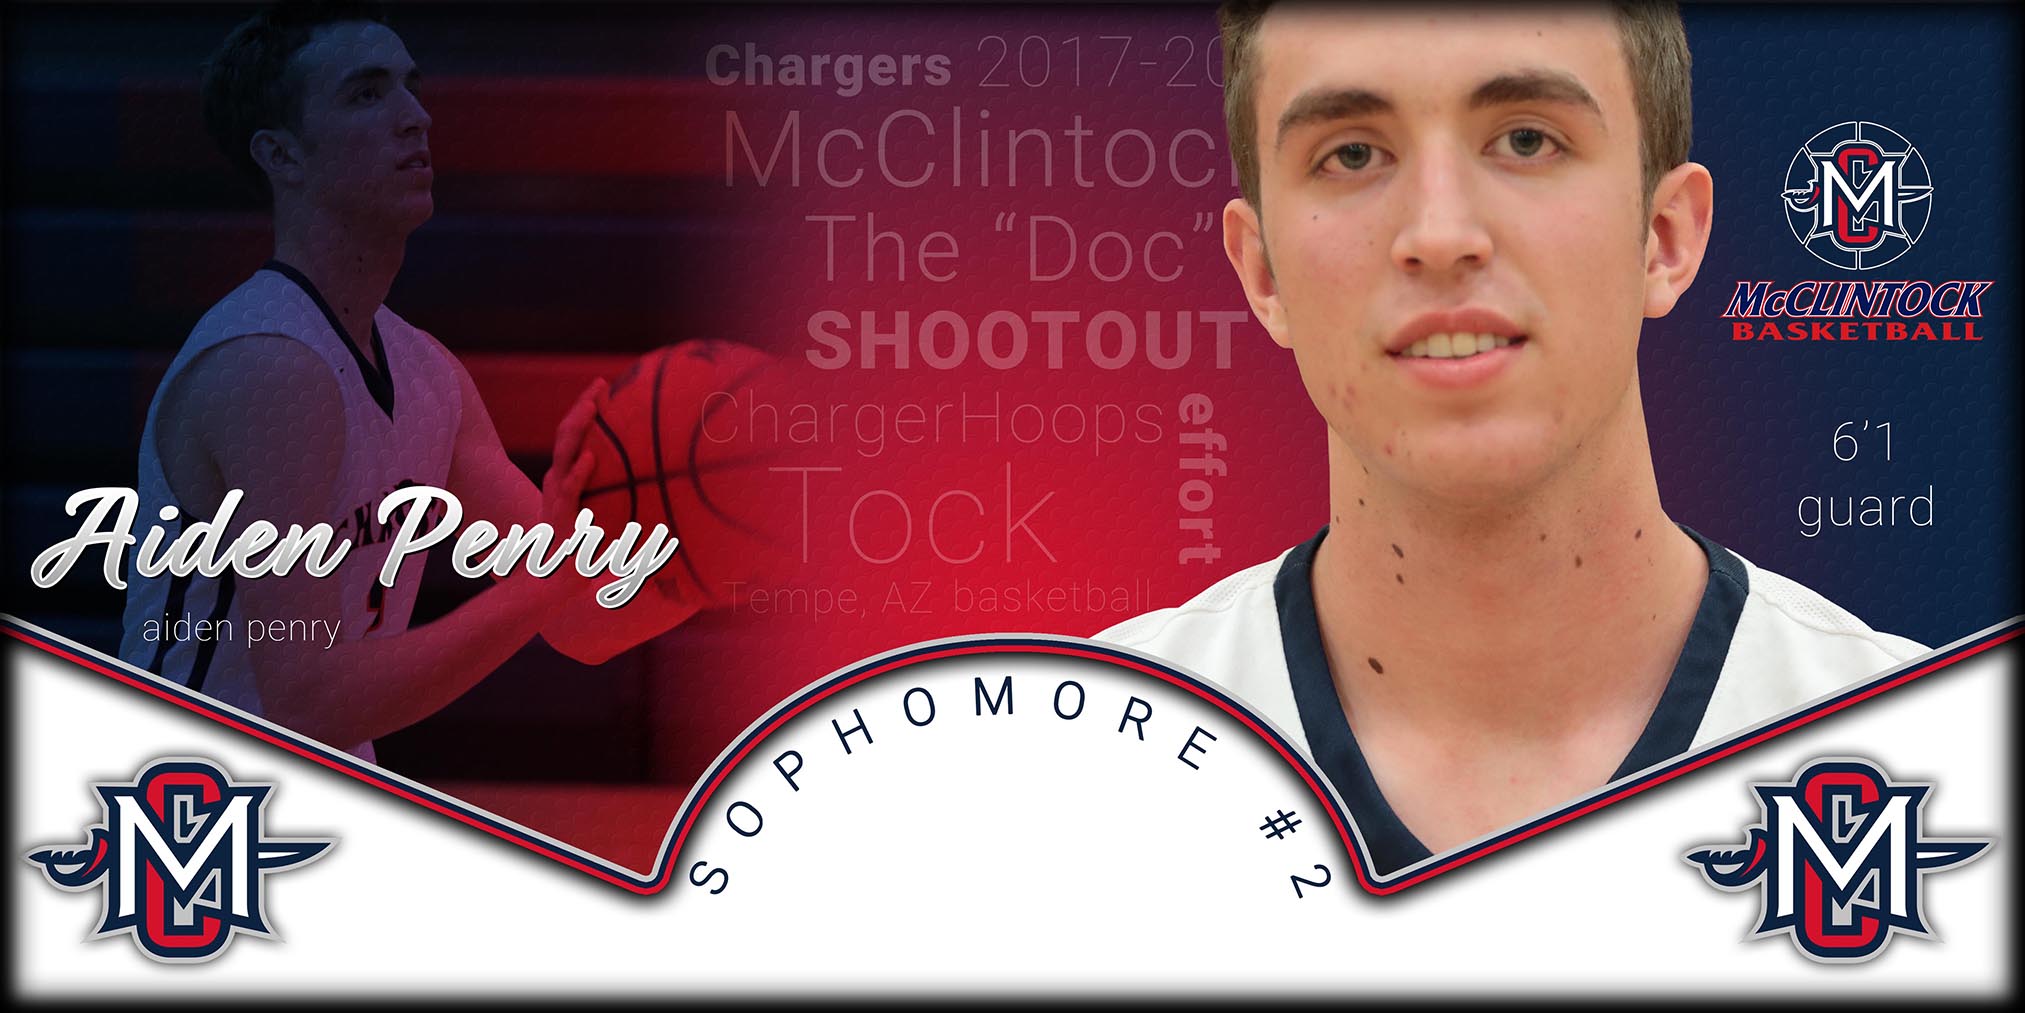 McClintock Chargers Basketball- Aiden Penry